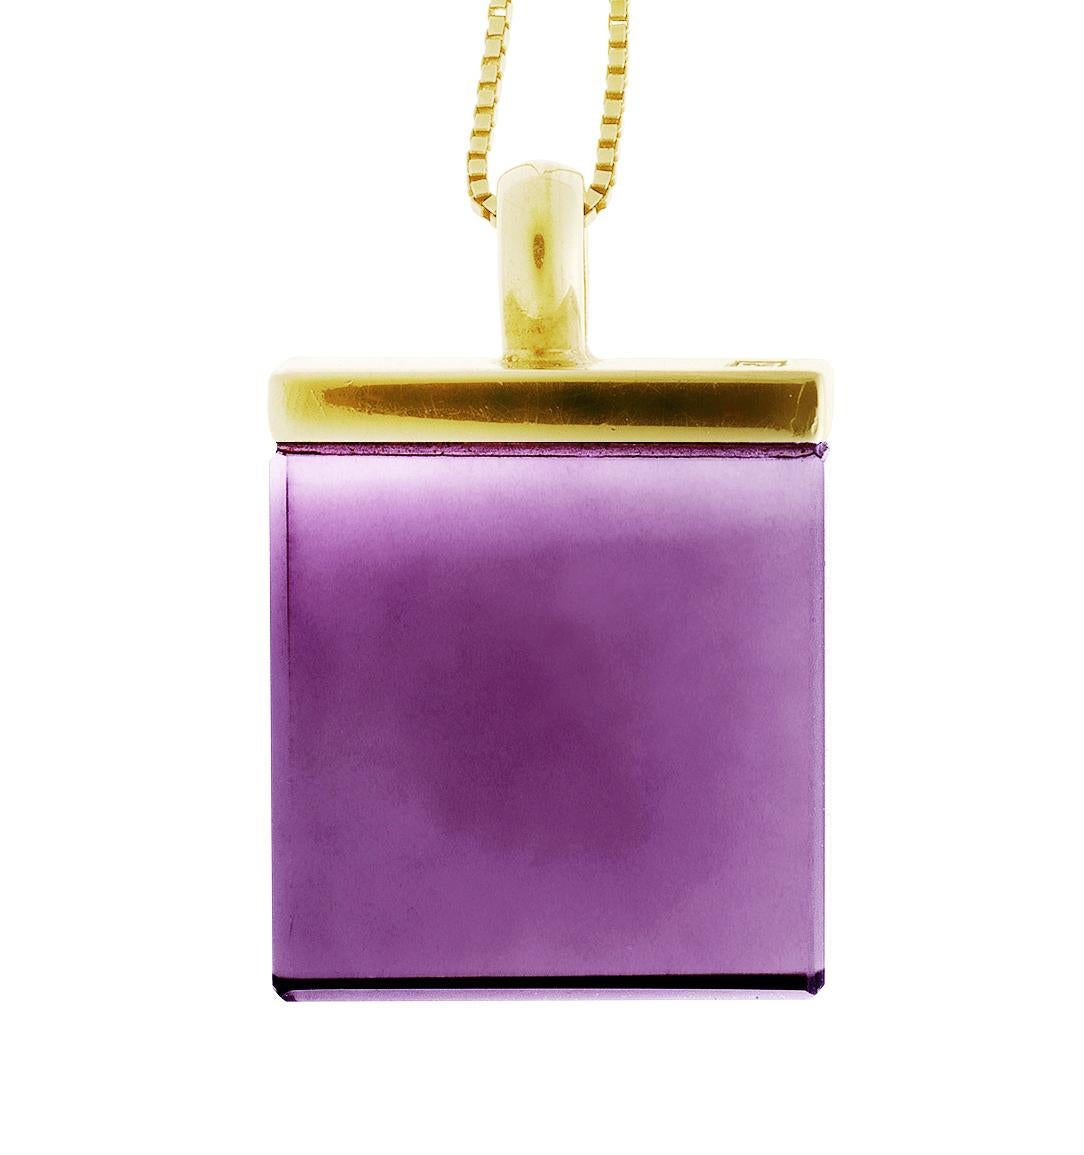 This contemporary pendant necklace features a large 15x15x8 mm size natural amethyst, expertly cut for the artist, and set in yellow gold-plated sterling silver. It is part of the Ink collection, which has been featured in Harper's Bazaar and Vogue